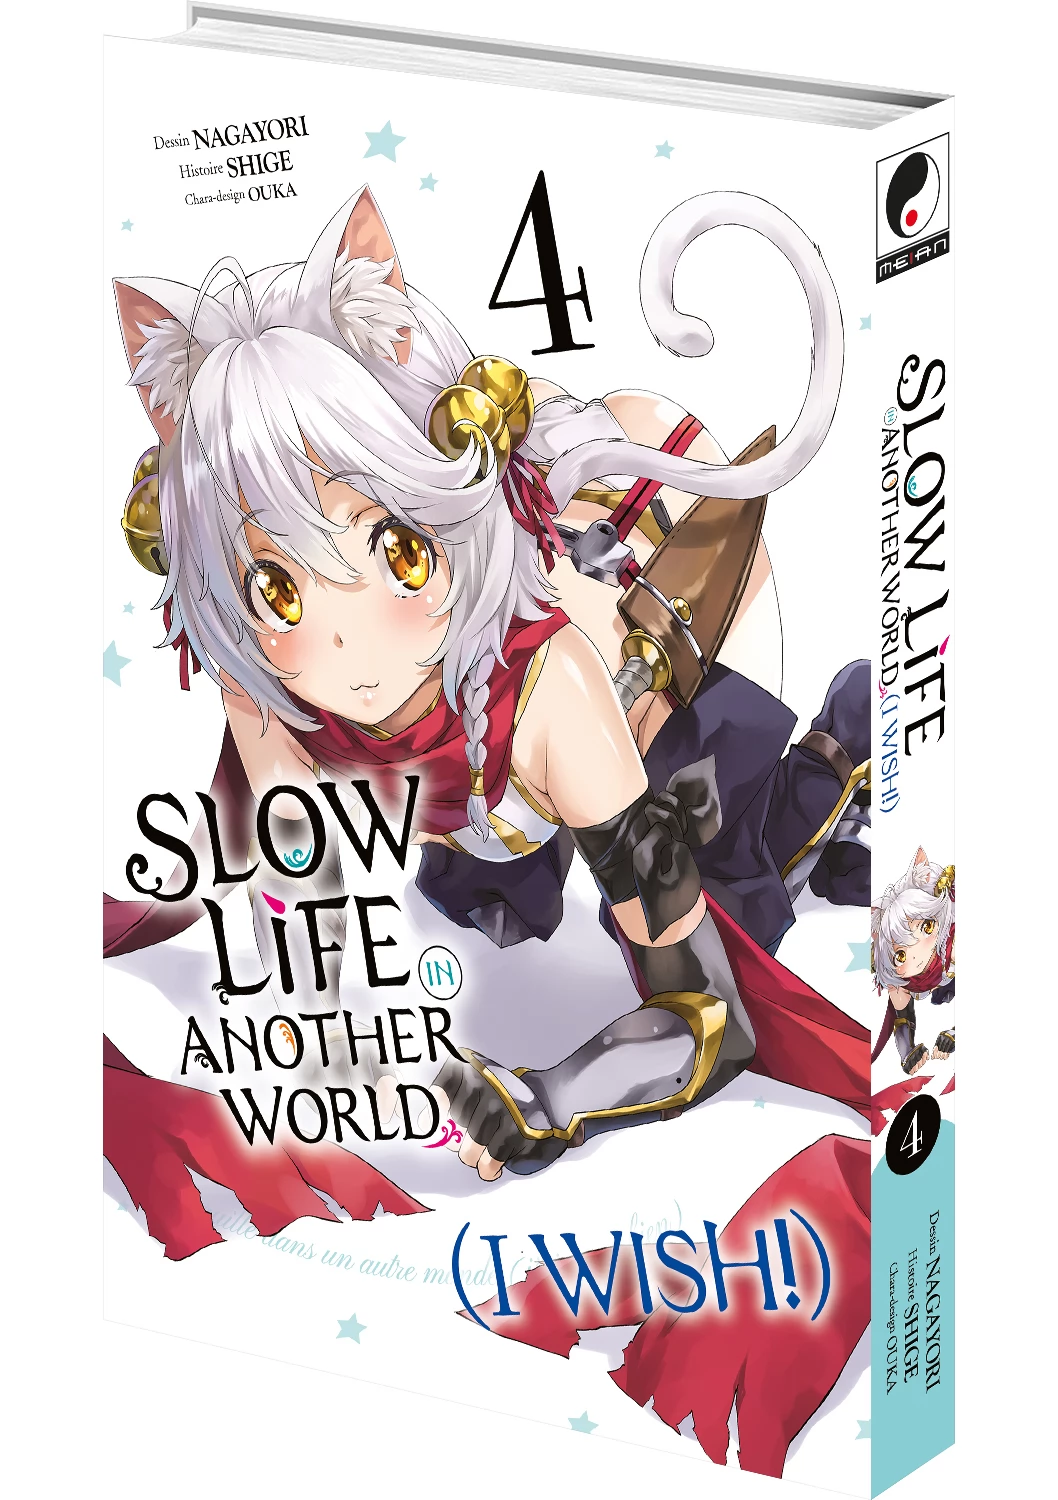 Slow Life In Another World (I Wish!), Tome 1 - Livre de Nagayori, Shige